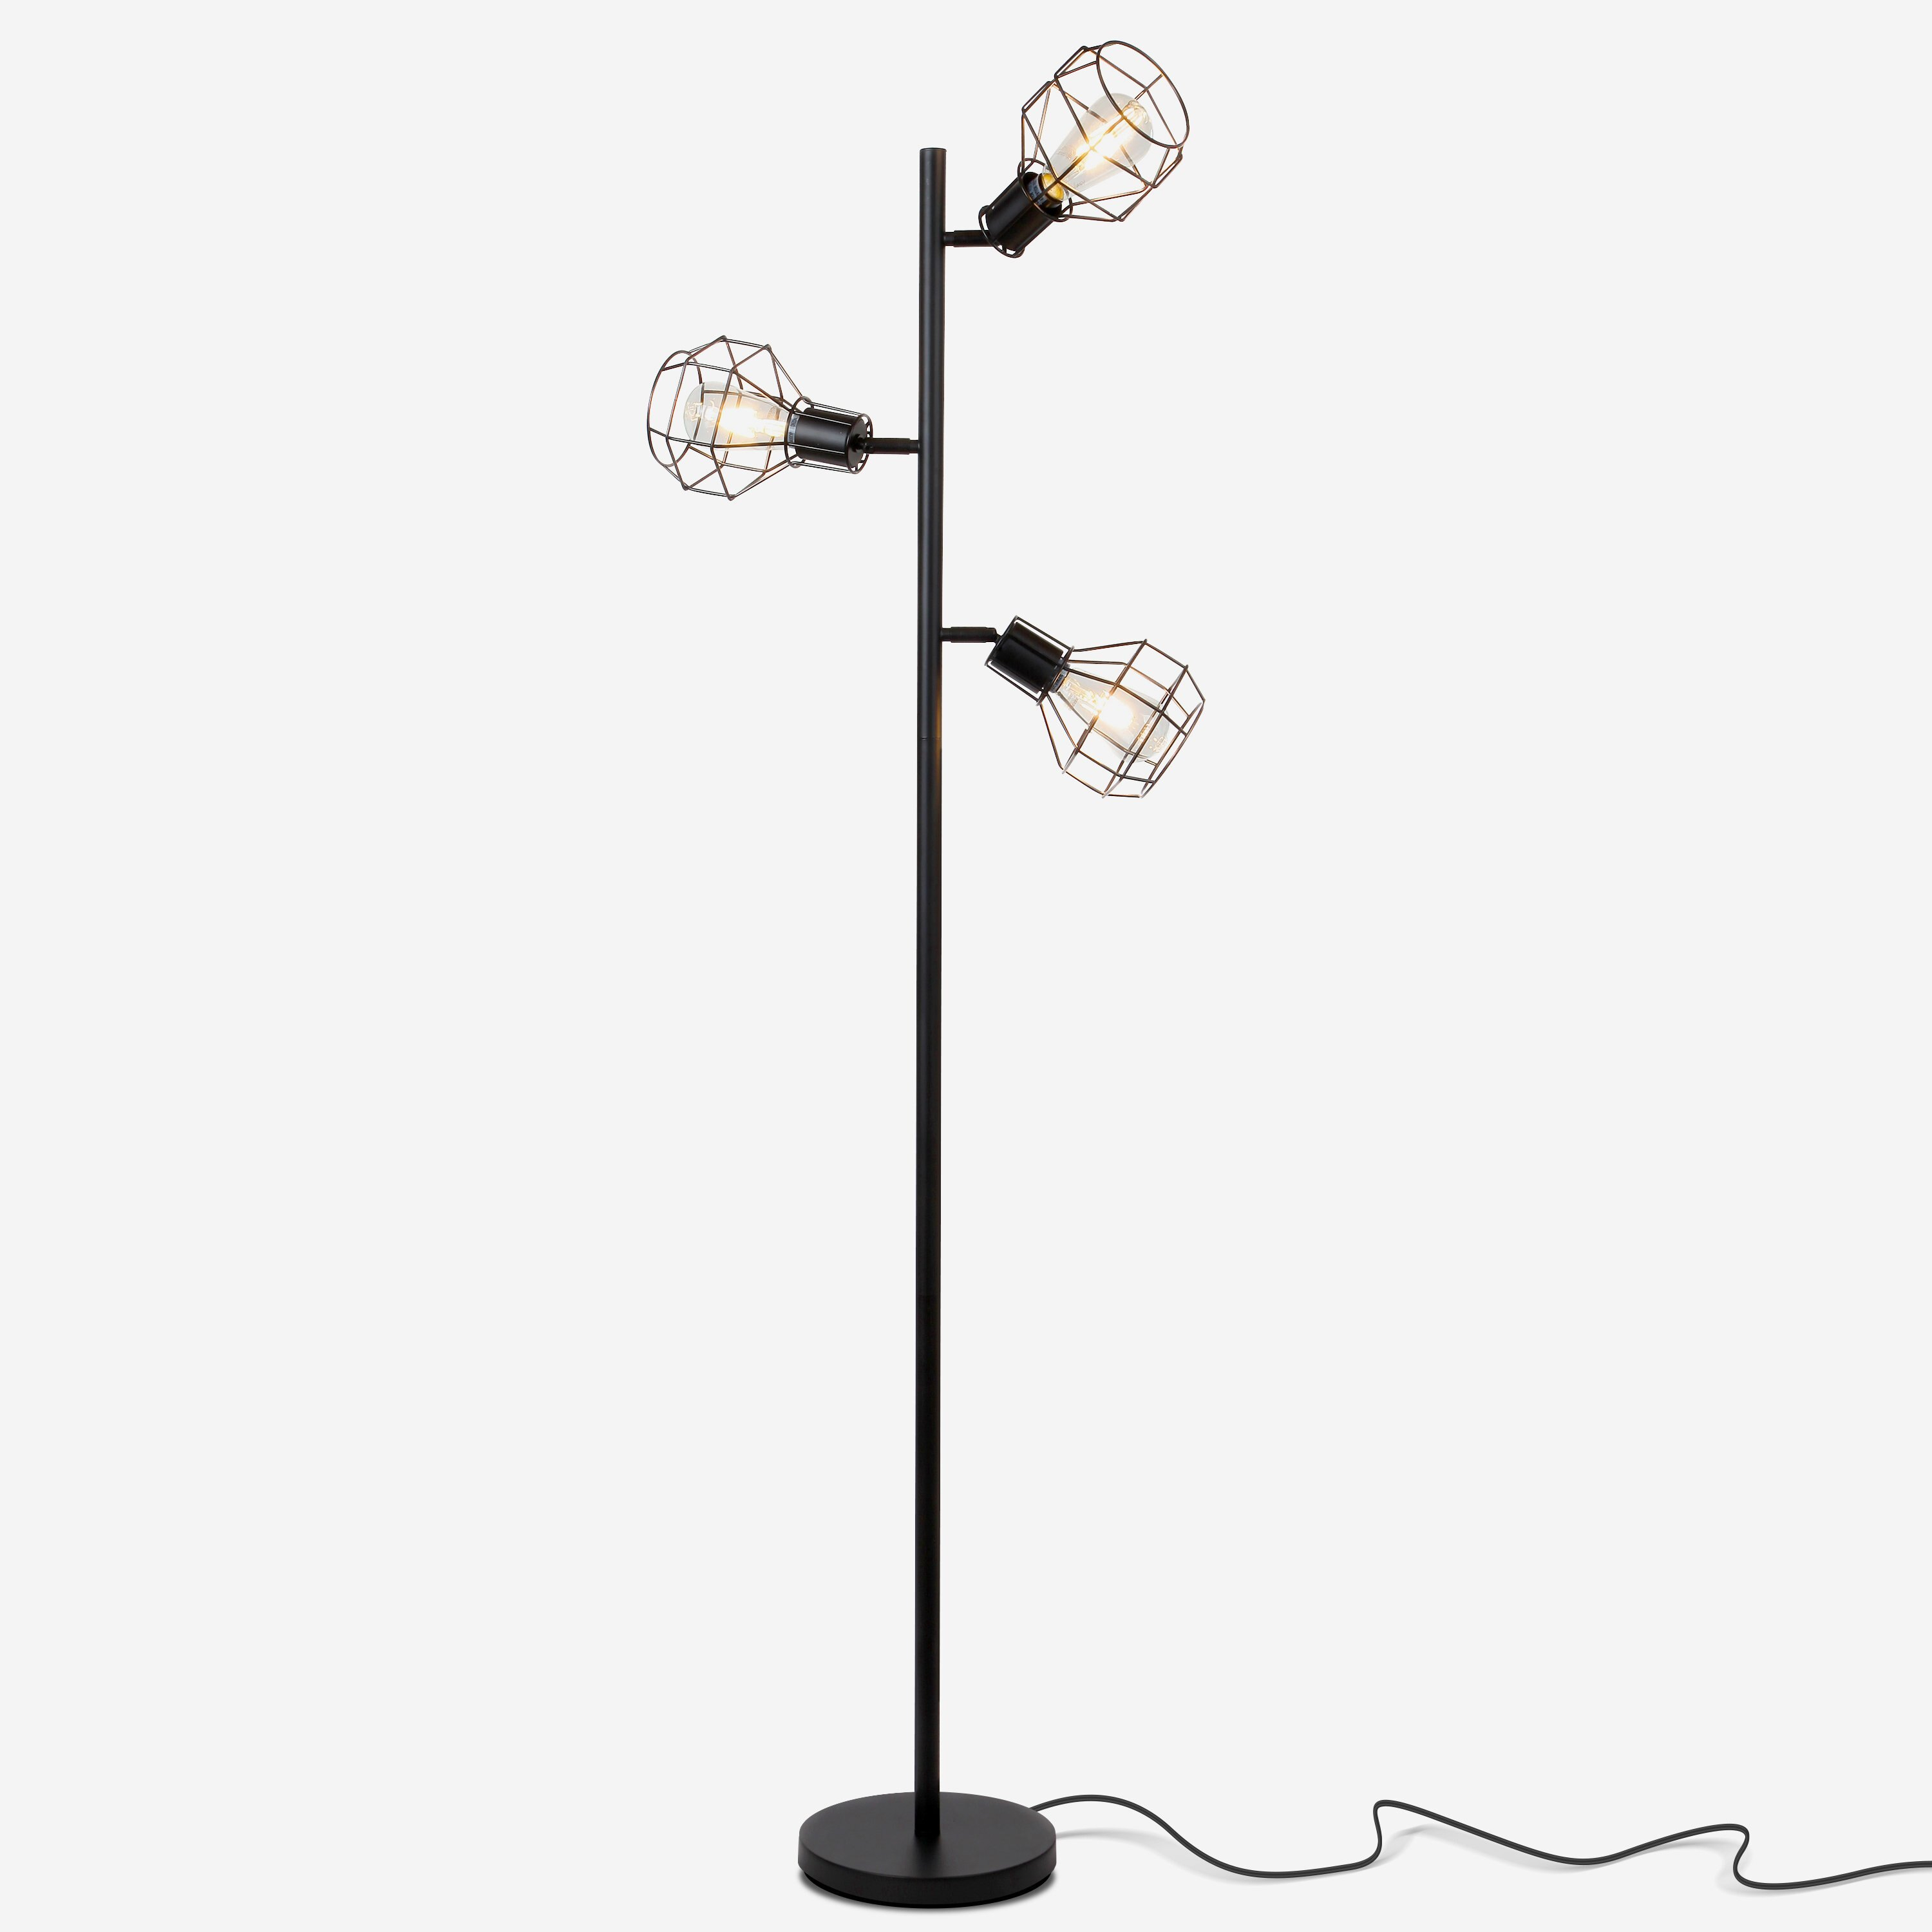 Robin Tree Led Floor Lamp Industrial Modern Style Cage Lantern Shade Tall Free Standing Pole With 3 Vintage Led Light Bulbs Contemporary Bright intended for proportions 3000 X 3000